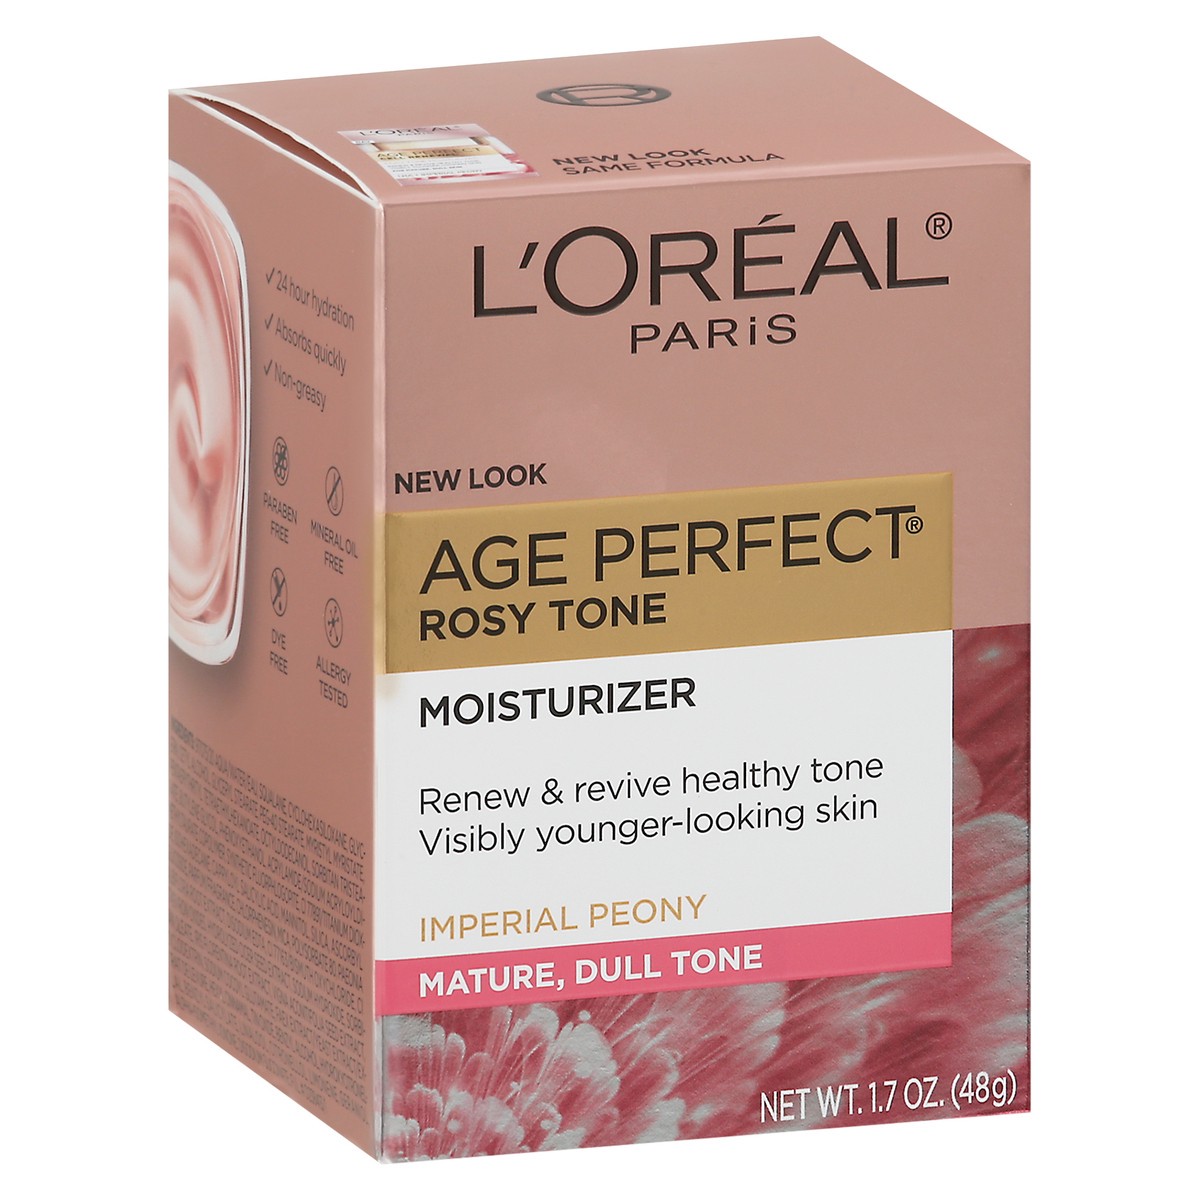 slide 12 of 13, Age Perfect Cell Renewal Rosy Tone Cream, 1.7 oz